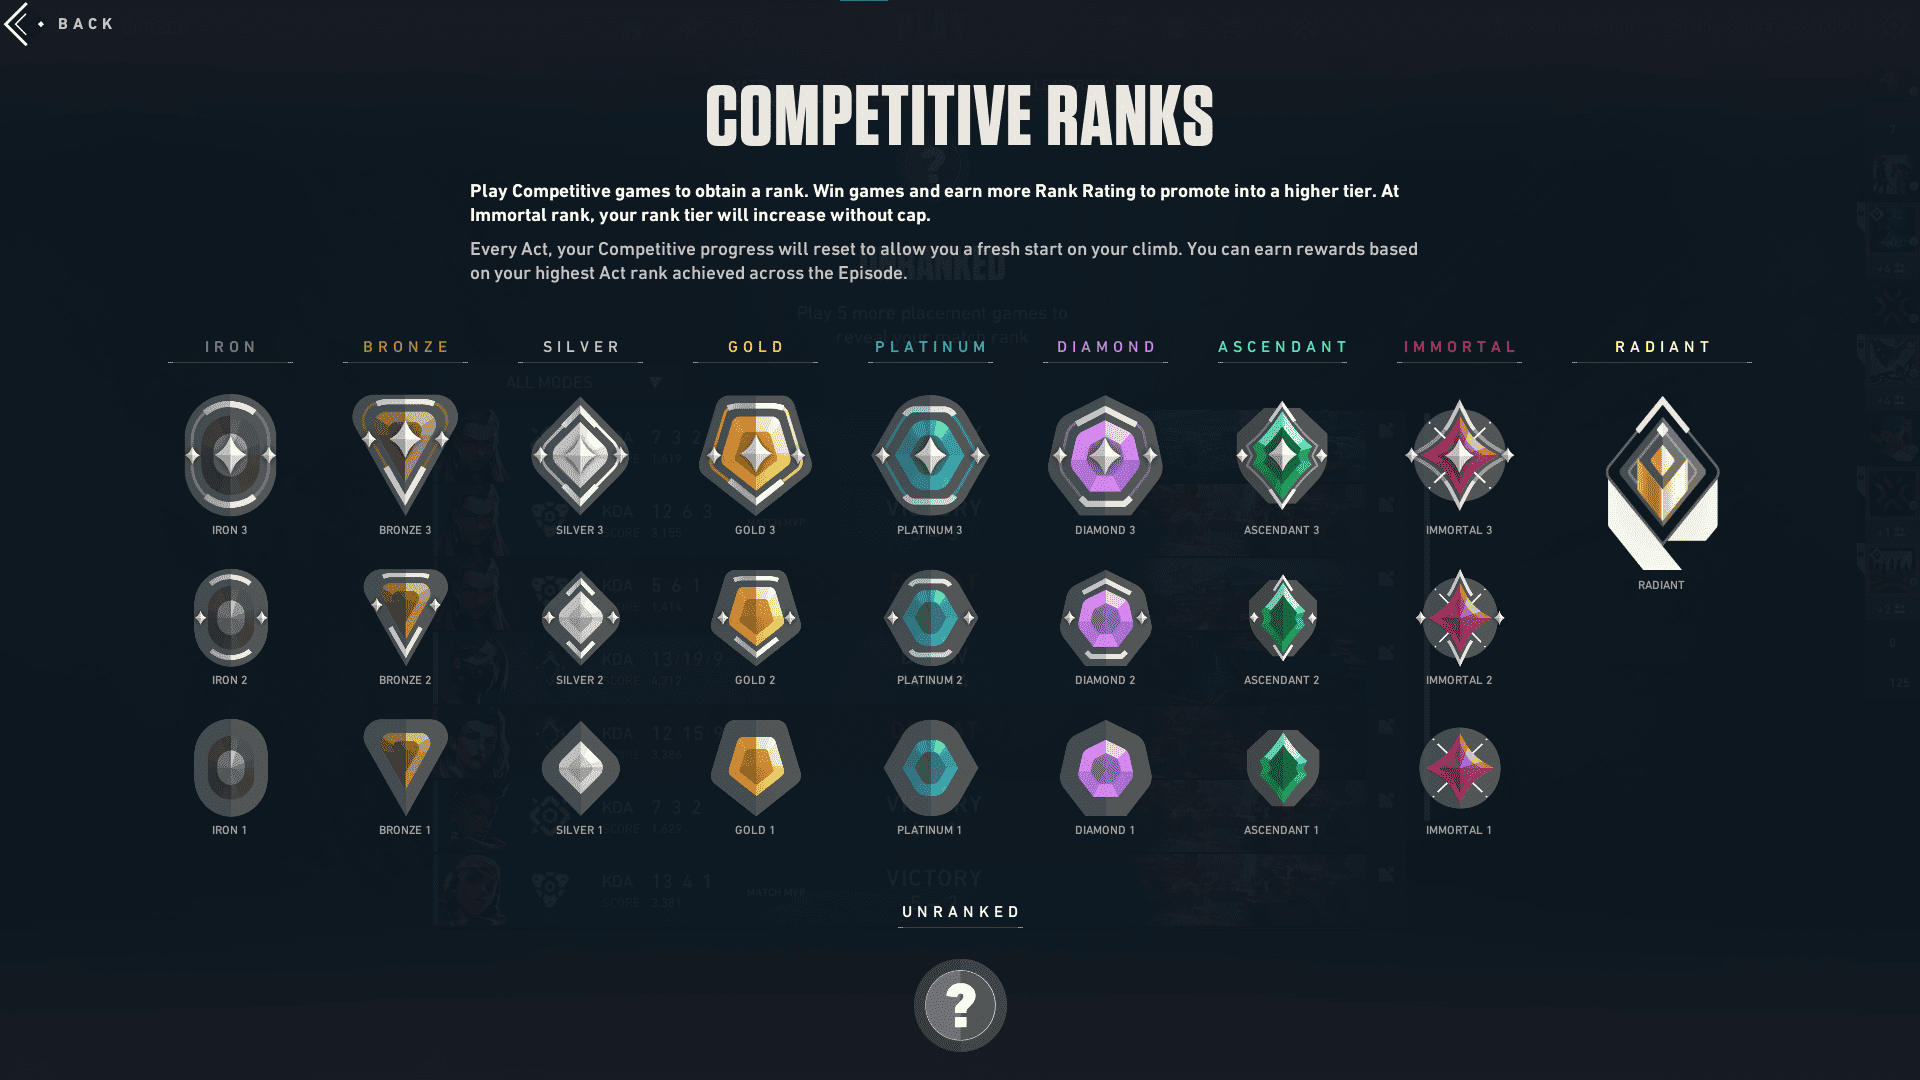 Valorant ranks: overview of competitive ranks.